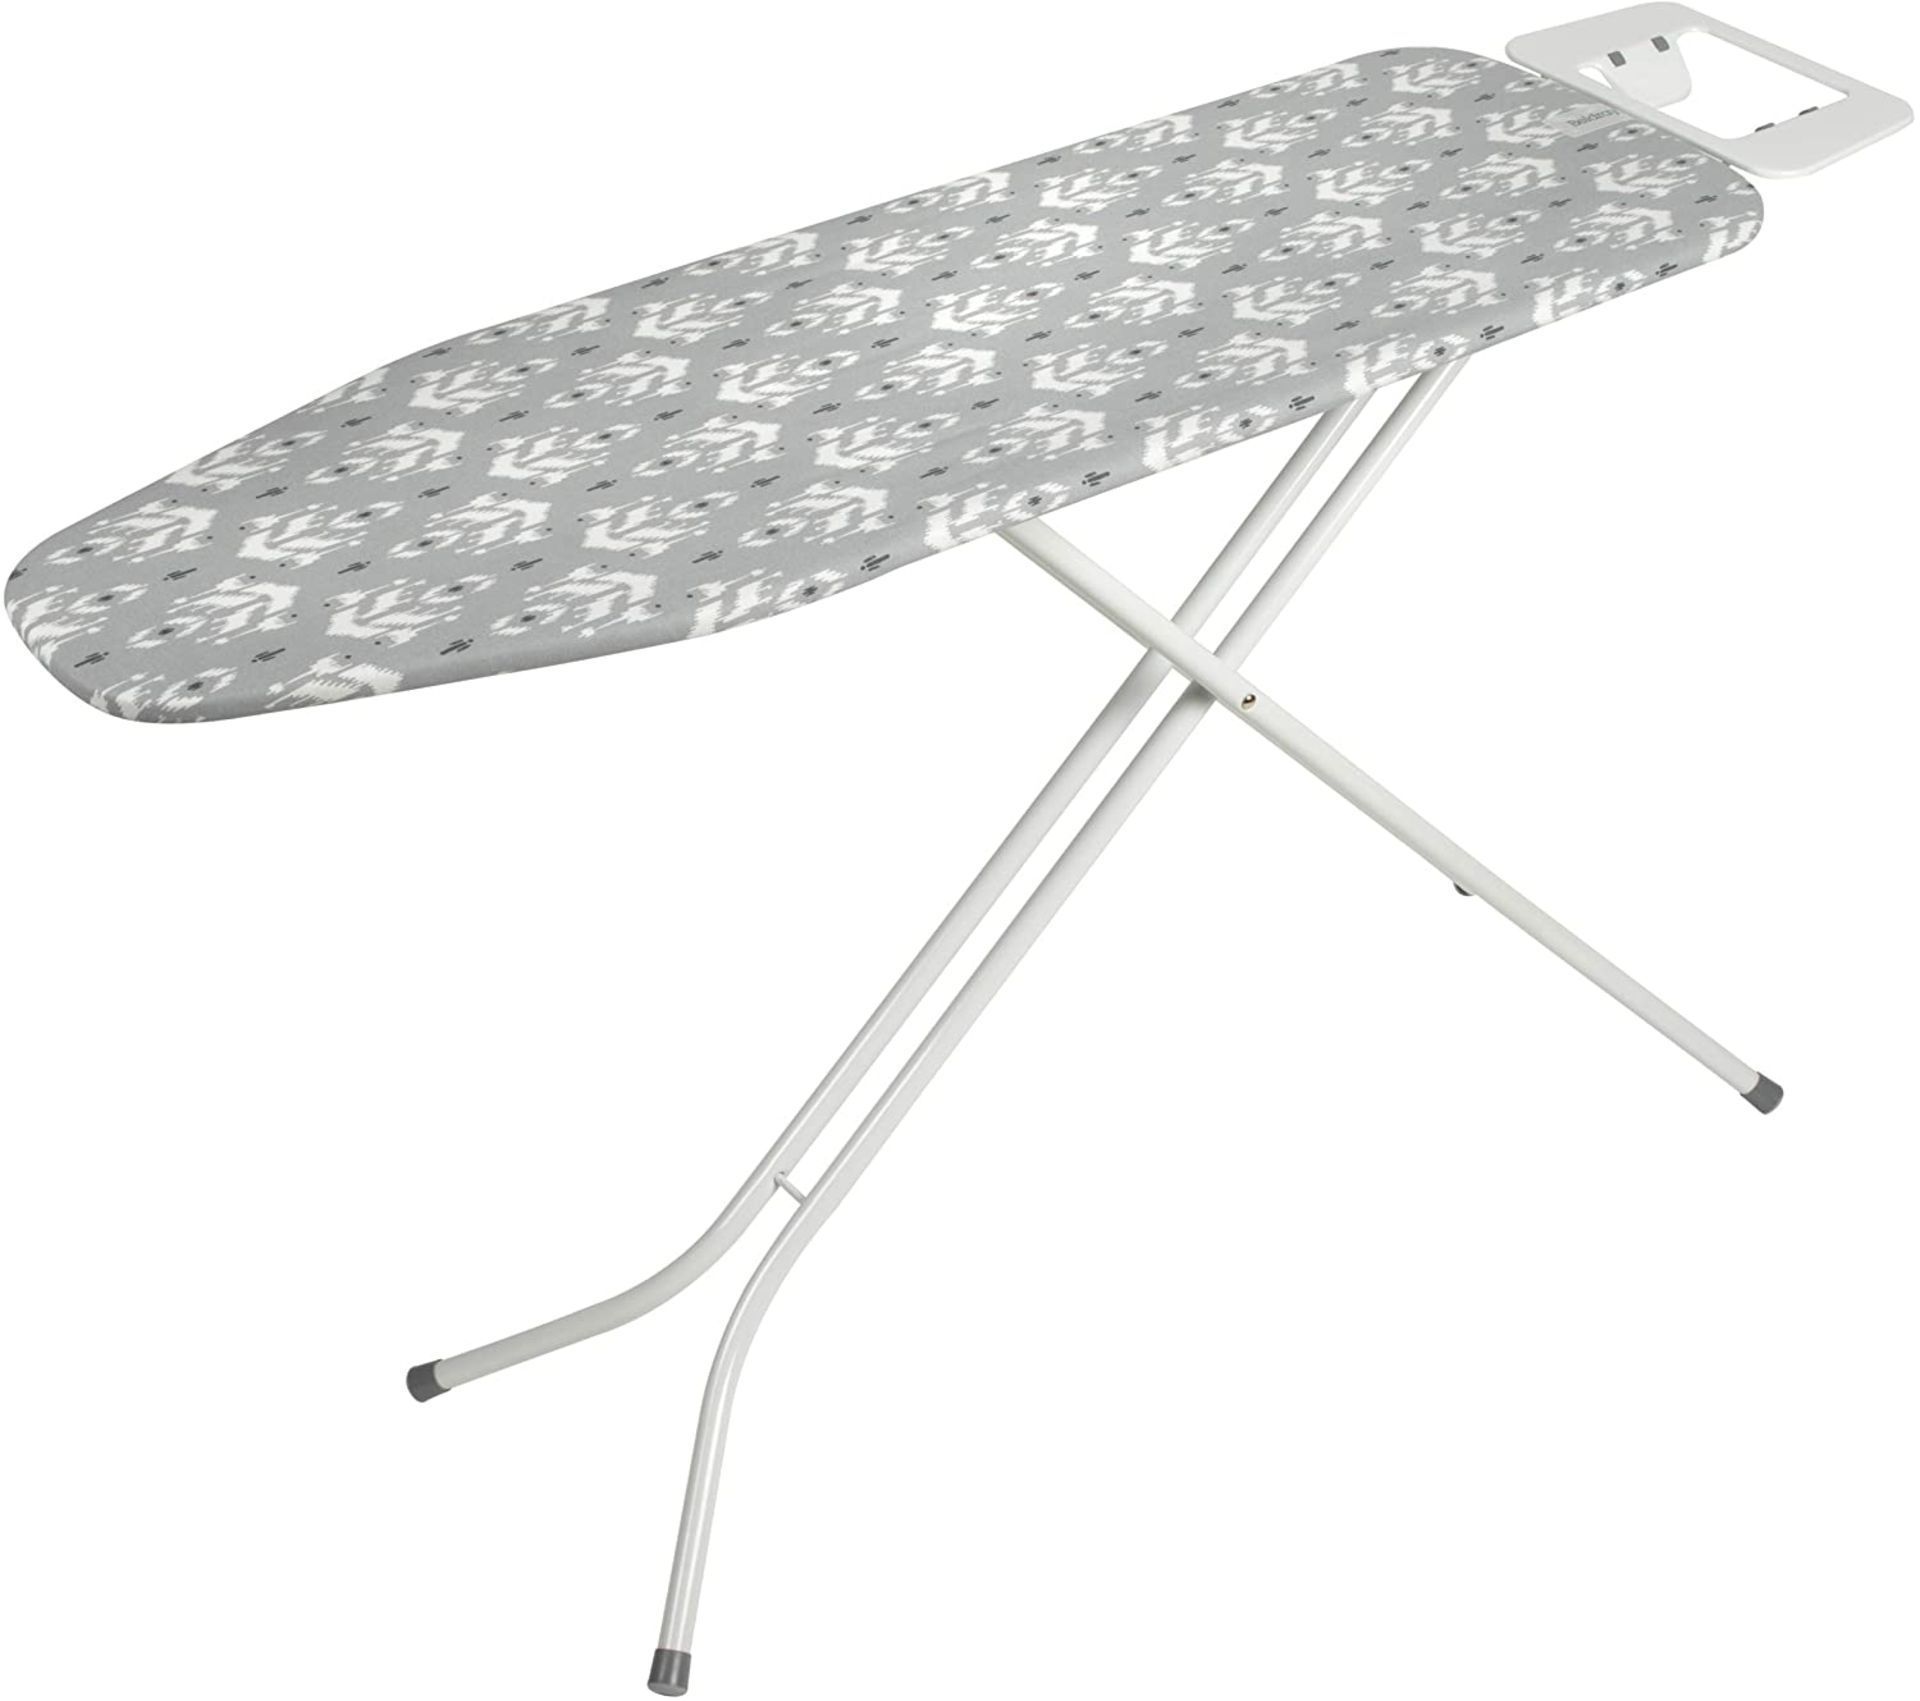 BRAND NEW BELDRAY IRONING BOARD |120 X 38 CM | INCLUDES 100% COTTON PRINT COVER